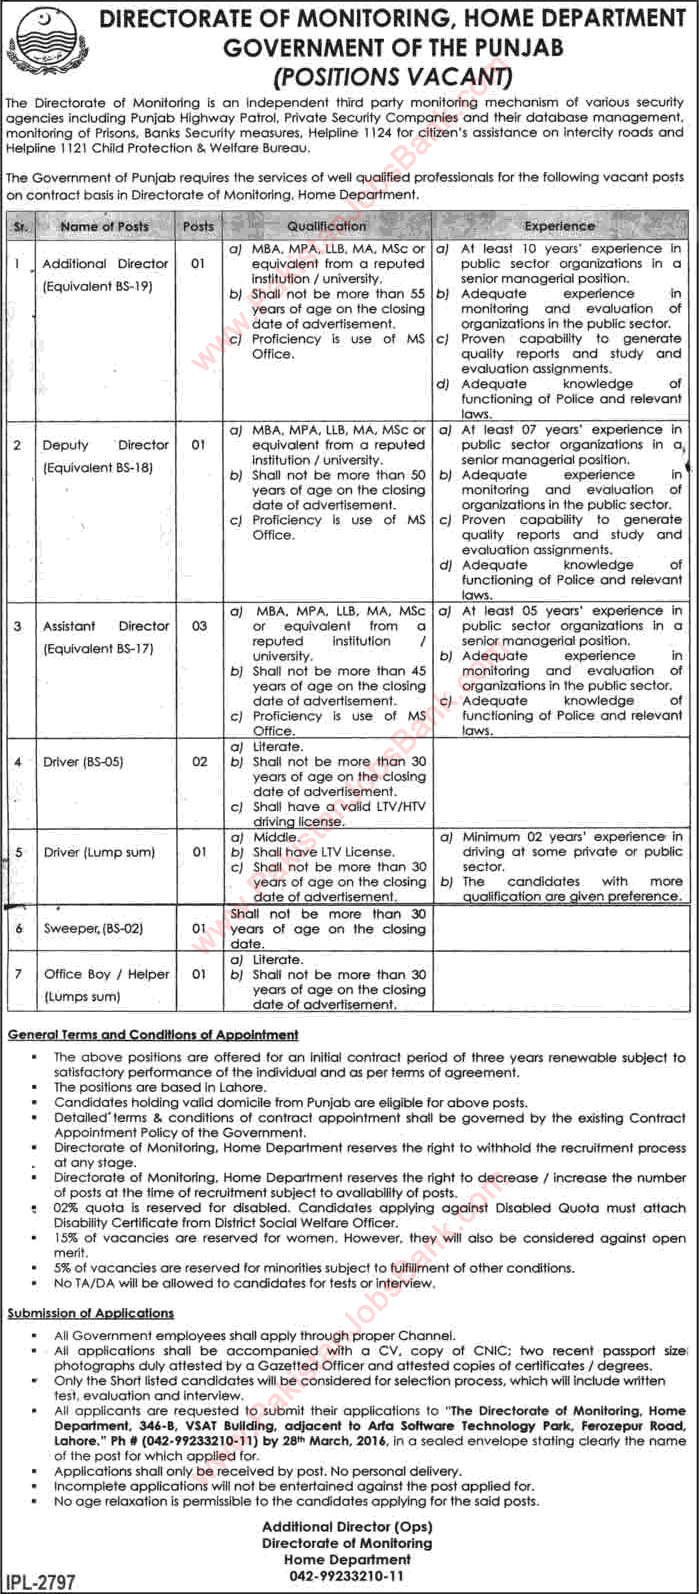 Home Department Punjab Jobs March 2016 Directorate of Monitoring Latest Advertisement